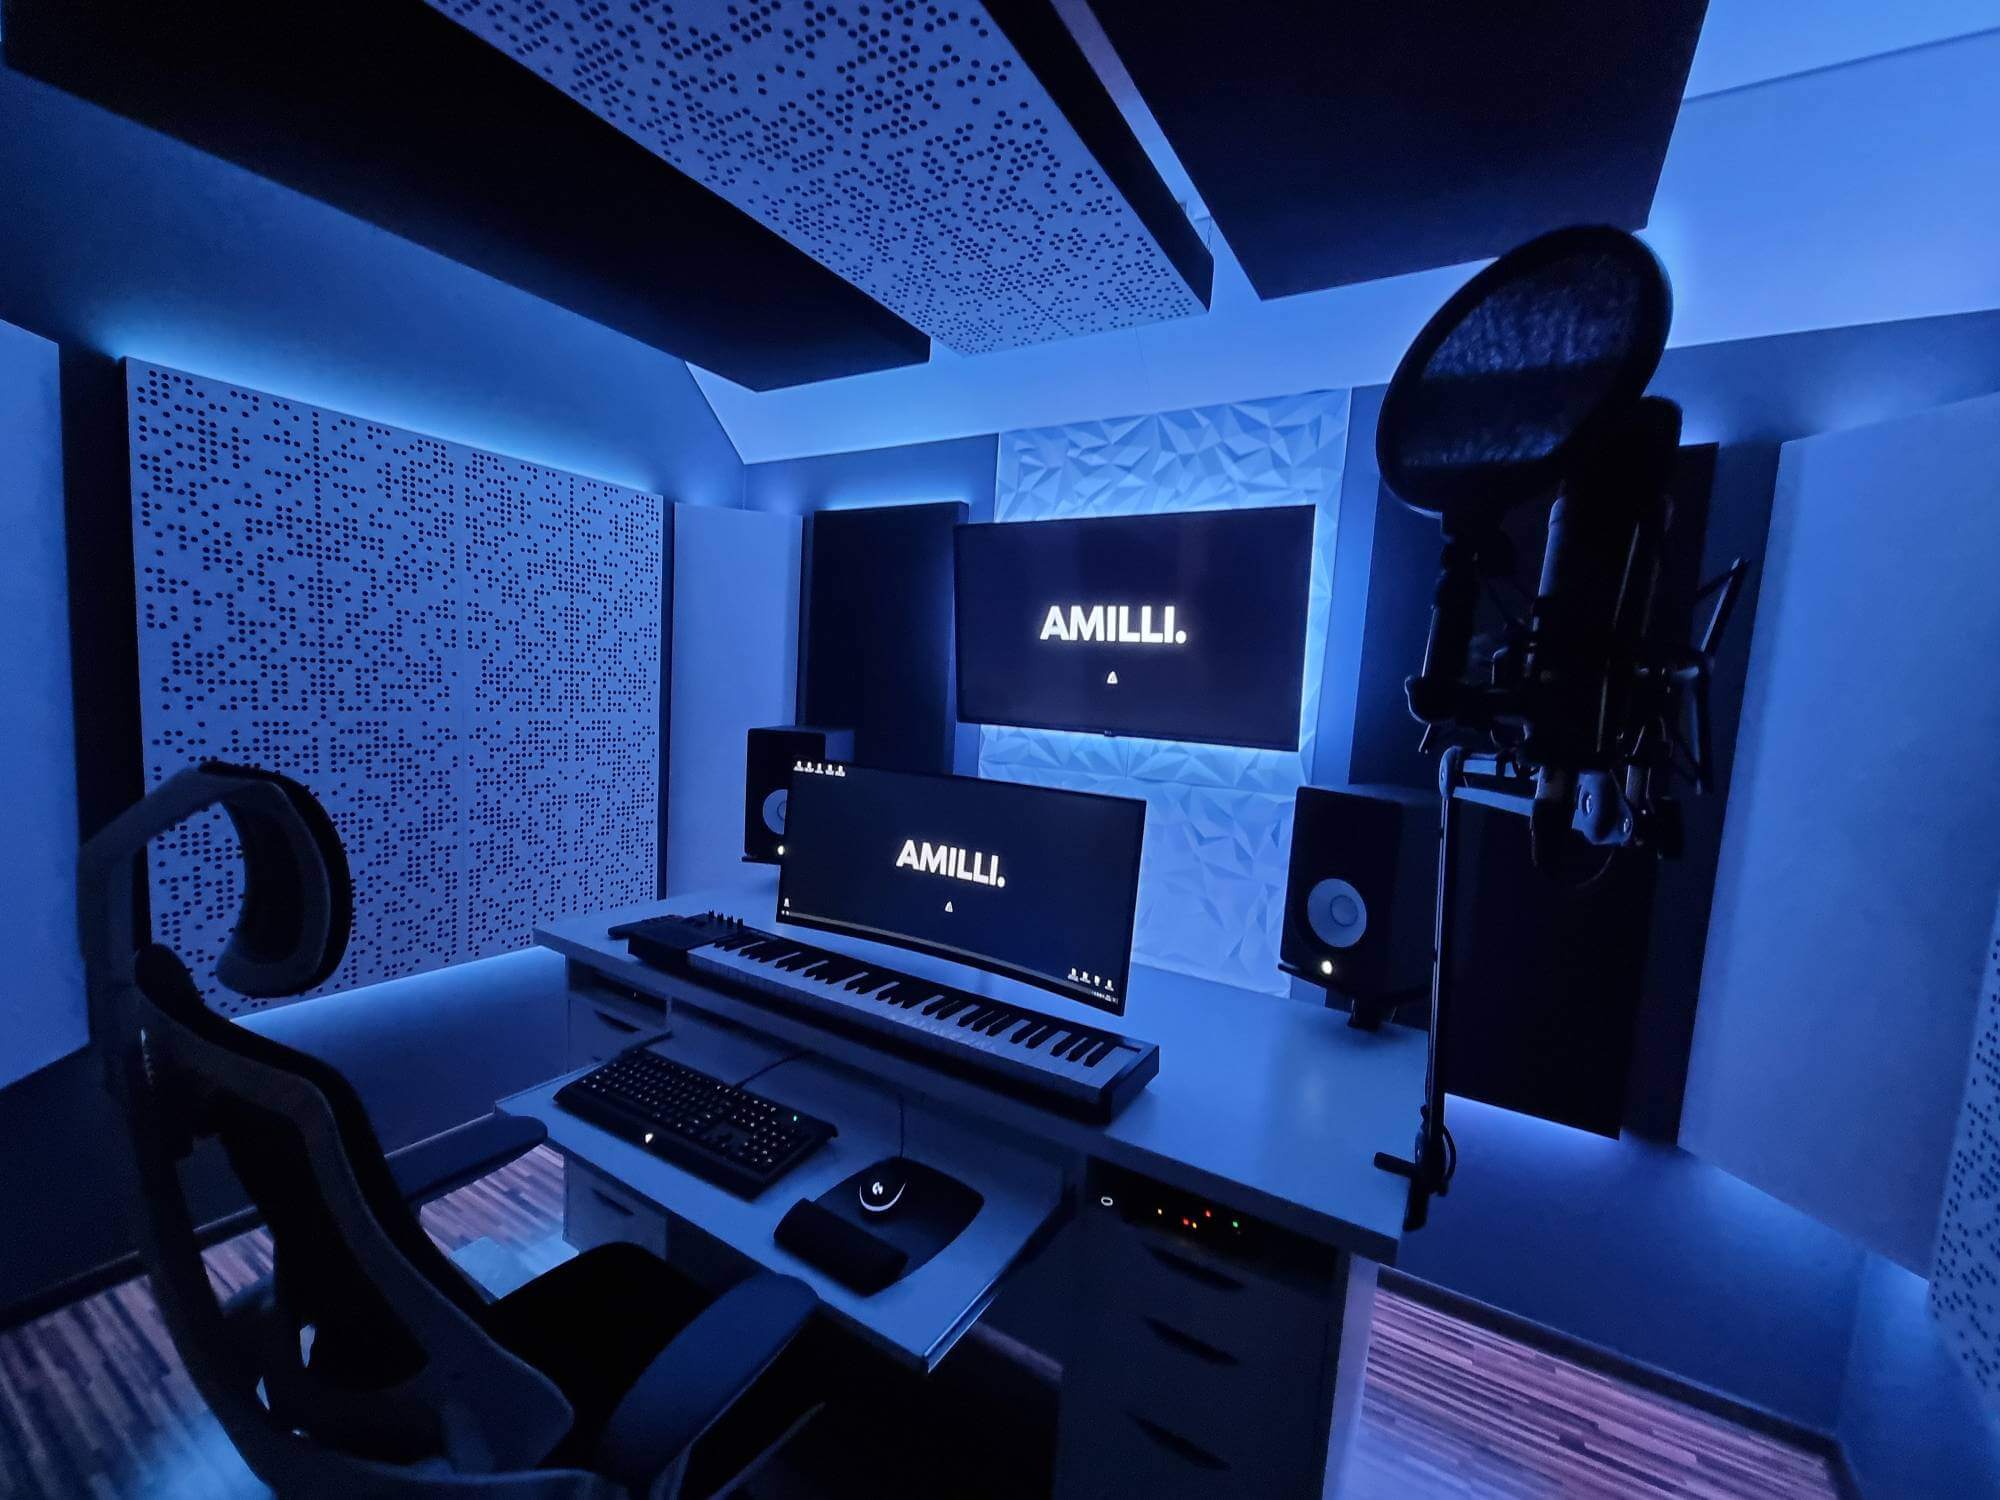 A modern music production setup illuminated by blue light, featuring a keyboard, computer monitors, studio speakers, and a professional microphone in an acoustically treated room